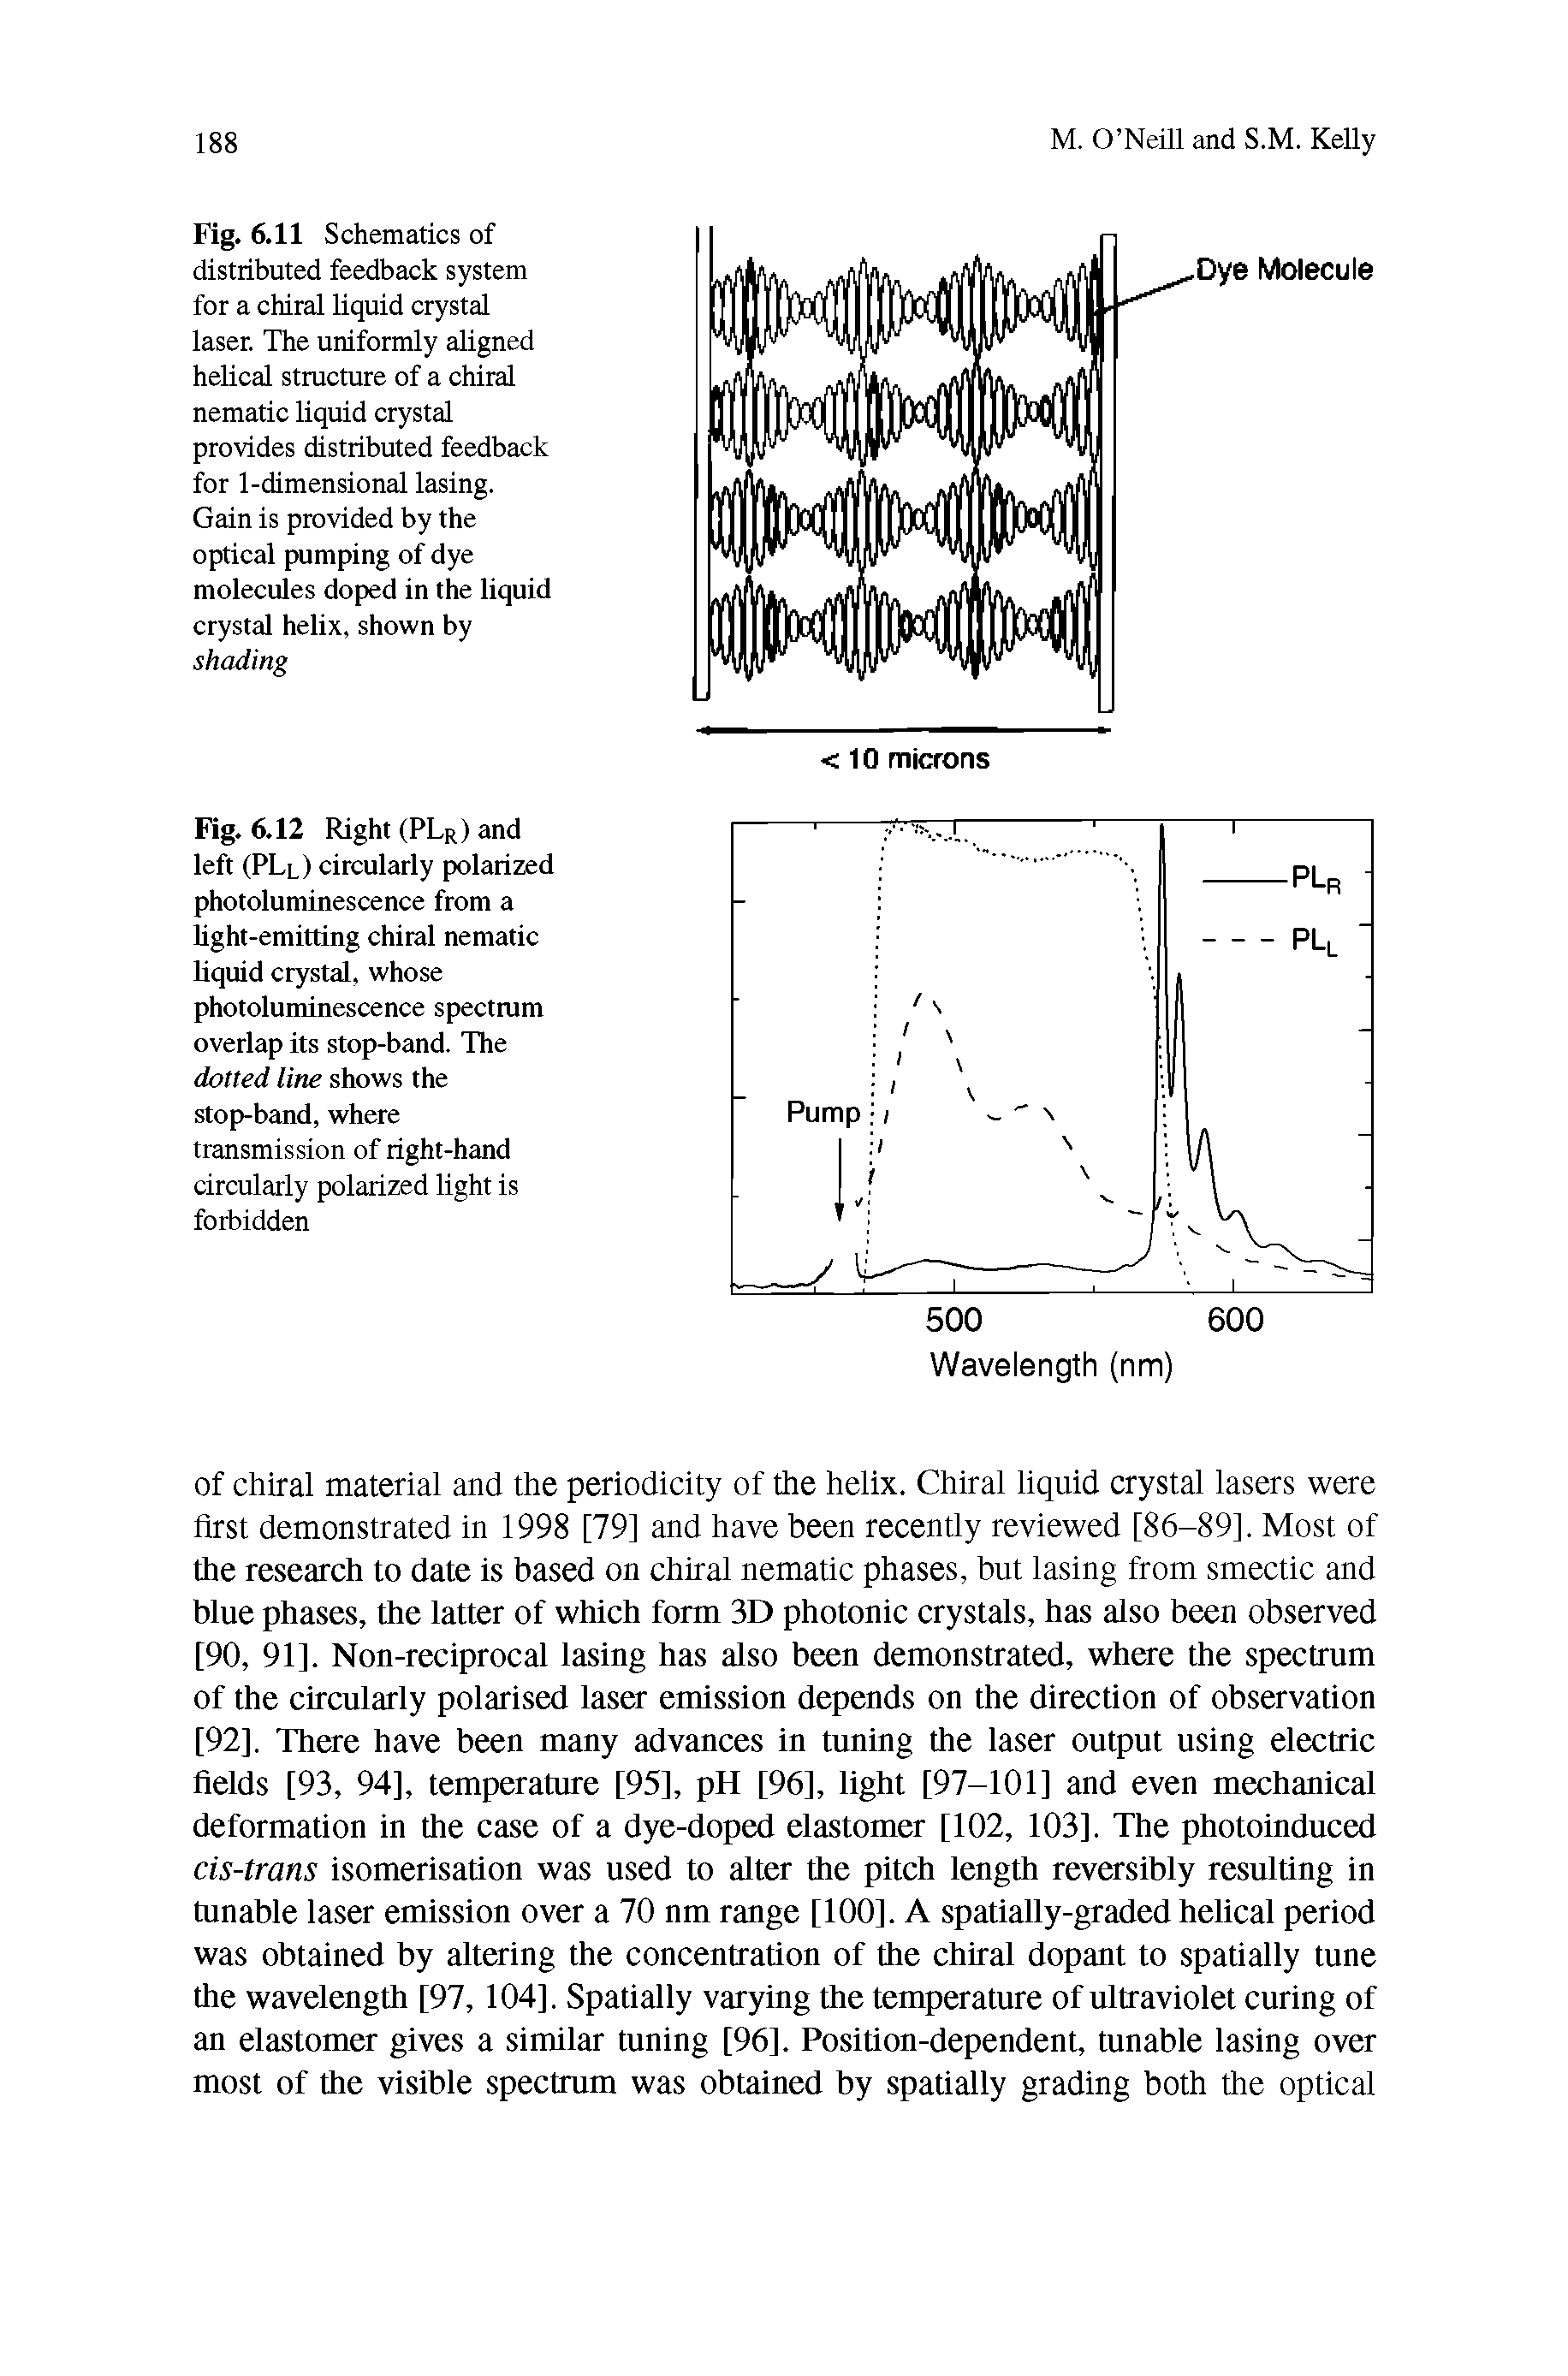 Fig. 6.12 Right (PLr) and left (PLl) circularly polarized photoluminescence from a light-emitting chiral nematic liquid crystal, whose photoluminescence spectrum overlap its stop-band. The dotted line shows the stop-band, where transmission of right-hand circularly polarized light is forbidden...